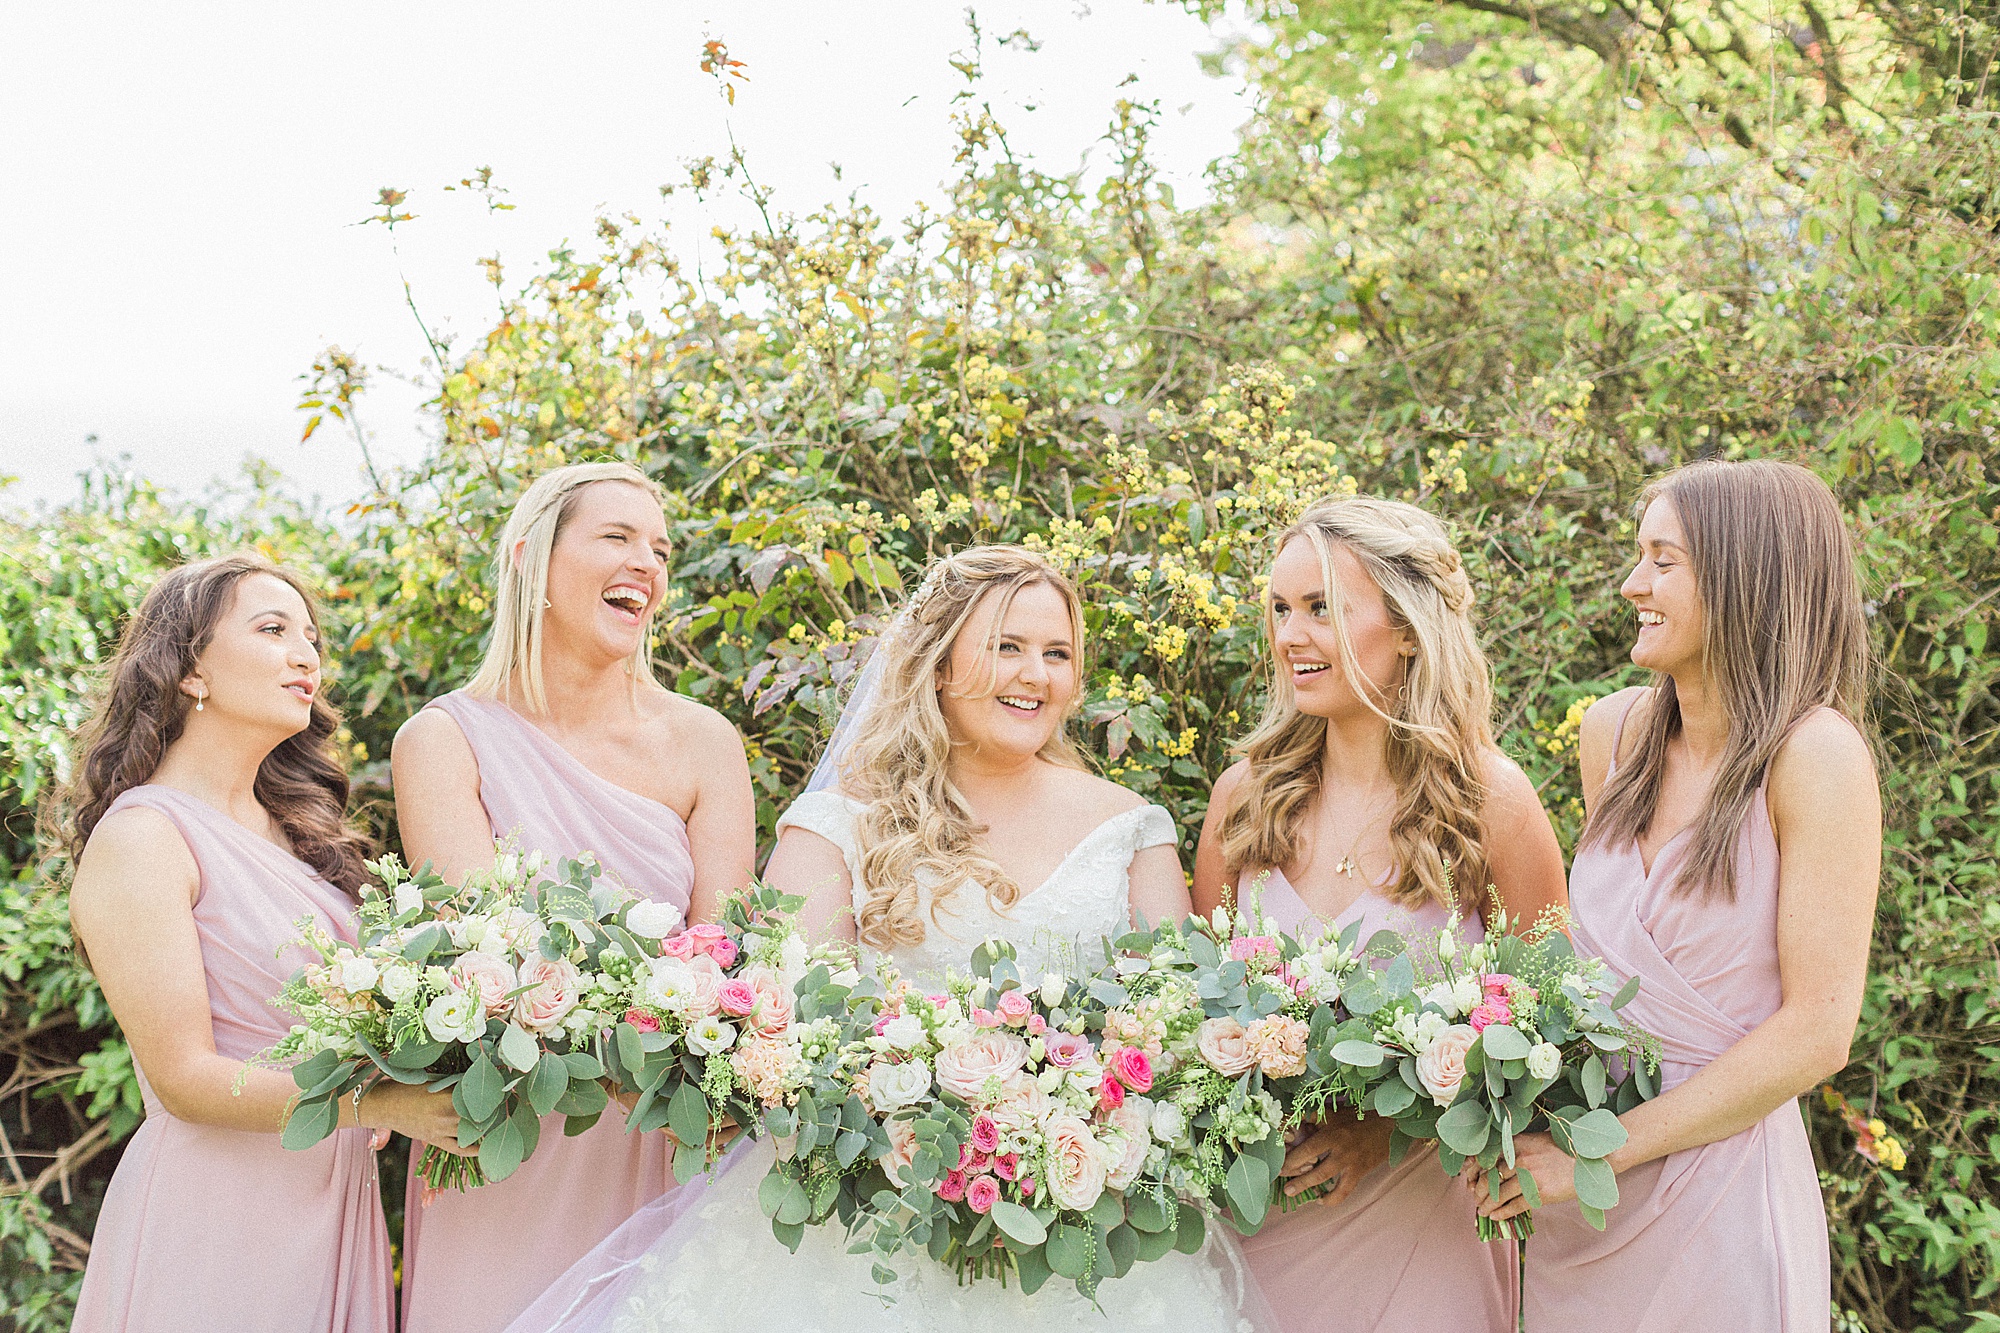 photo of a bride and her bridesmaids posed together smiling and laughing each holding their bouquets